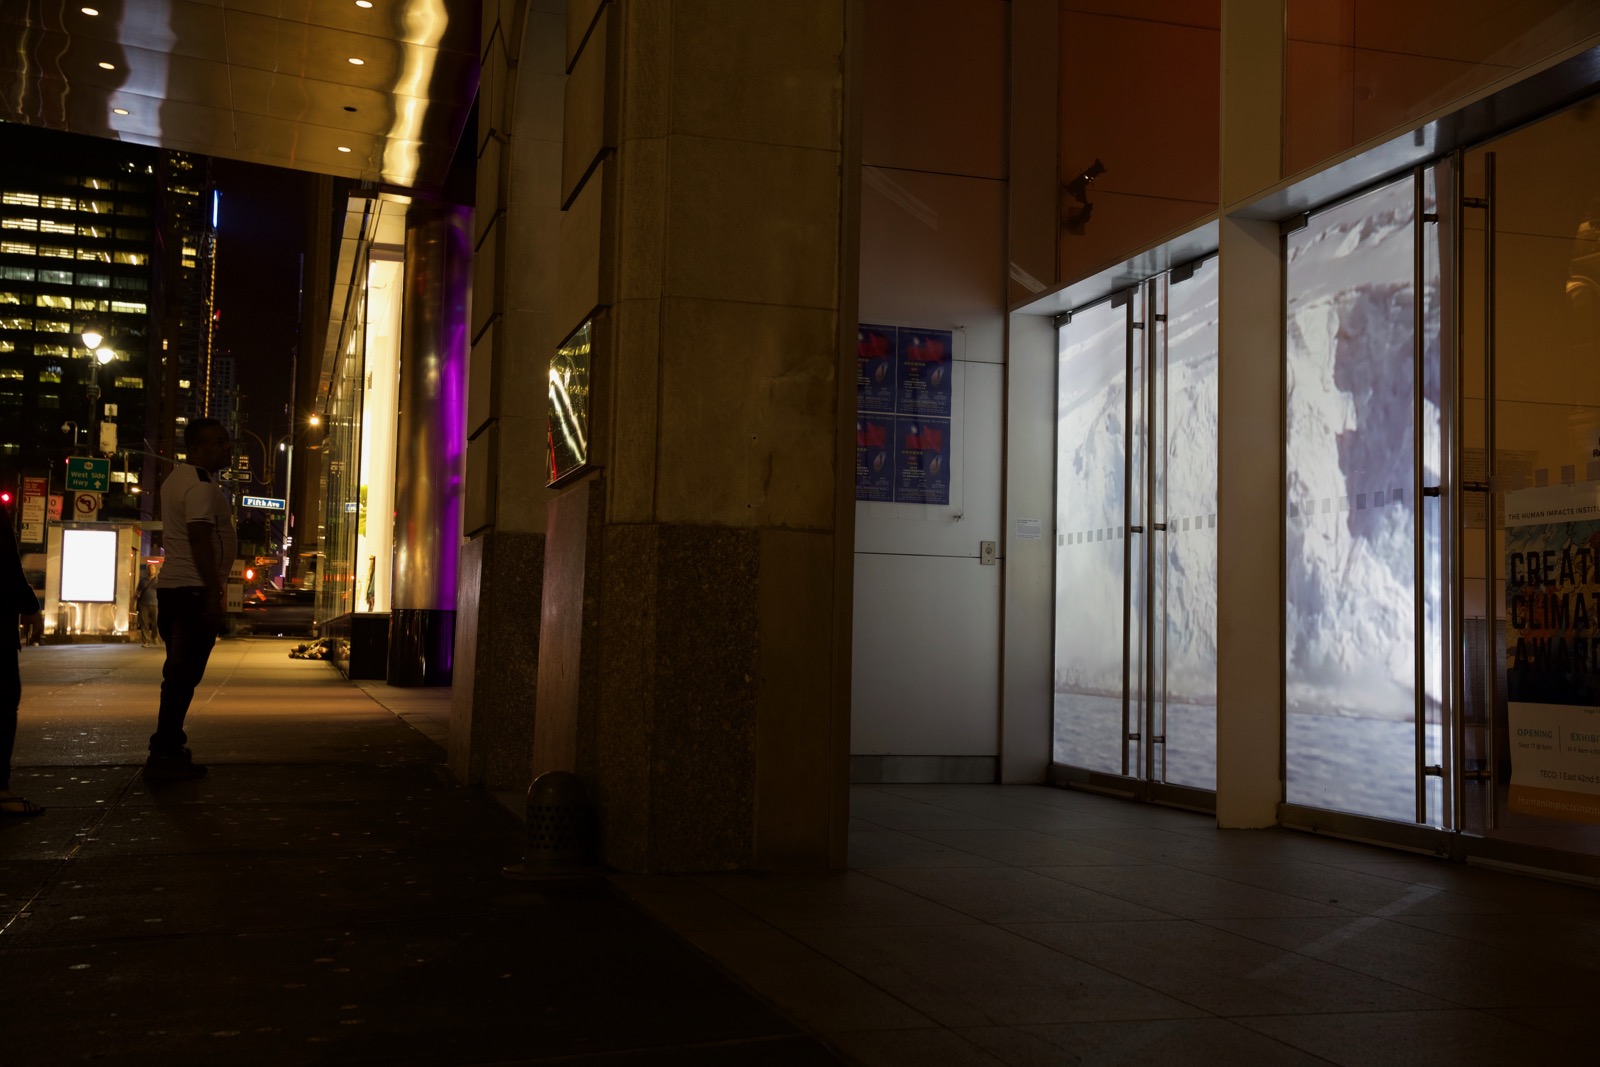 Small thumbnail image of Nighttime photograph of a city street—a street sign in the far background says 'Fifth Avenue.' On the left side is a passerby who has stopped and is looking at the projection of an arctic scene (glaciers) in the windows of the building on the right.